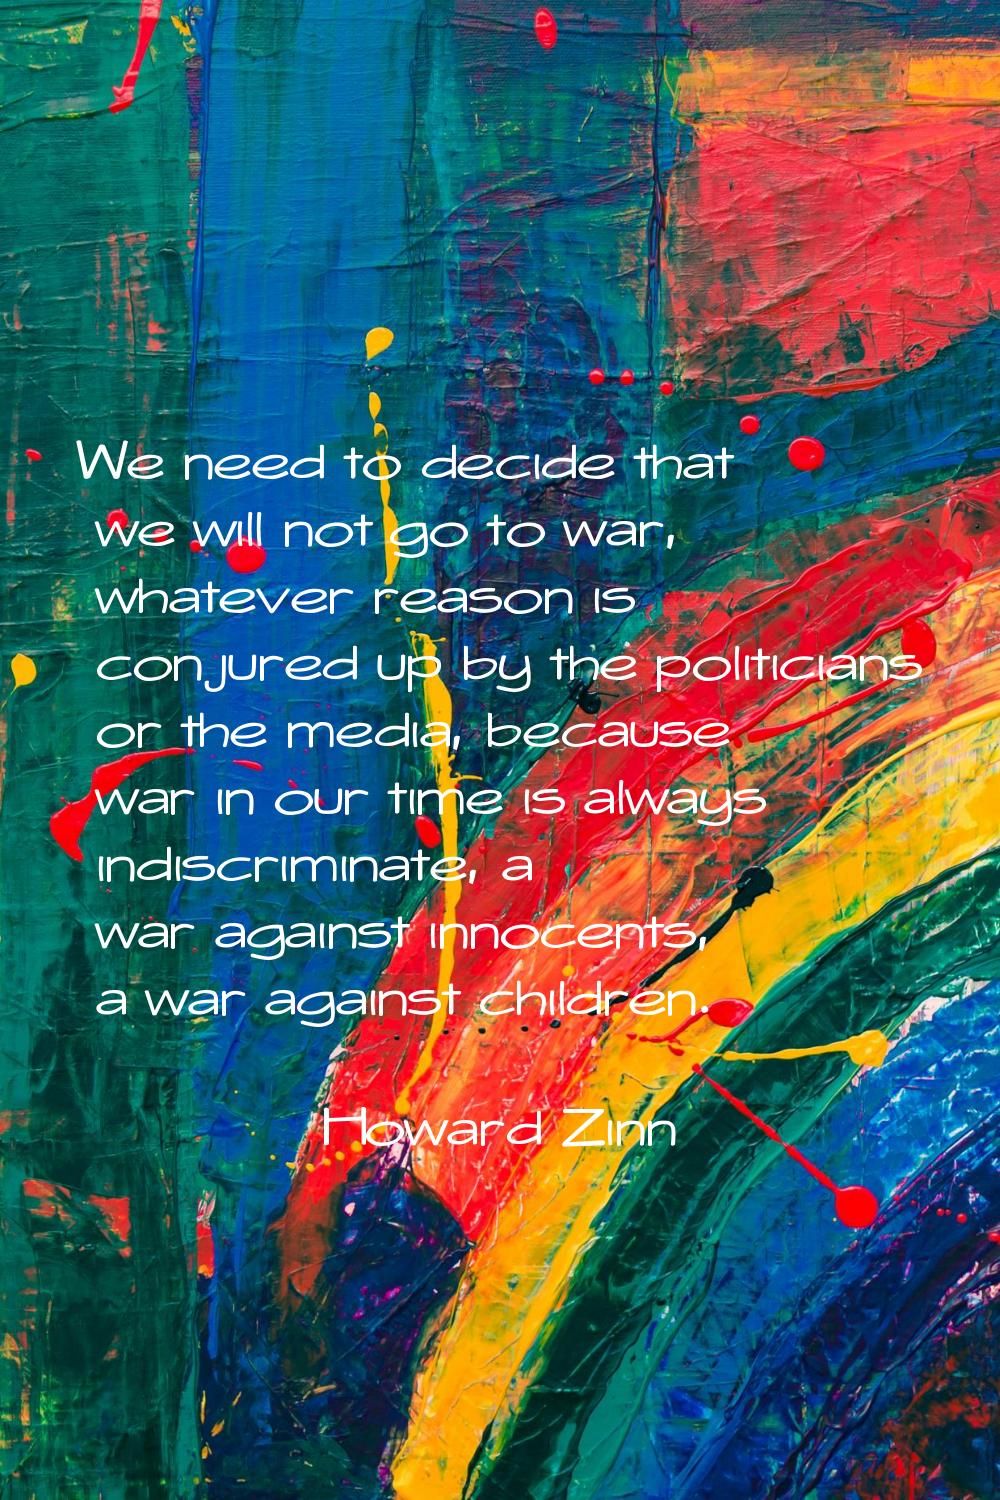 We need to decide that we will not go to war, whatever reason is conjured up by the politicians or 